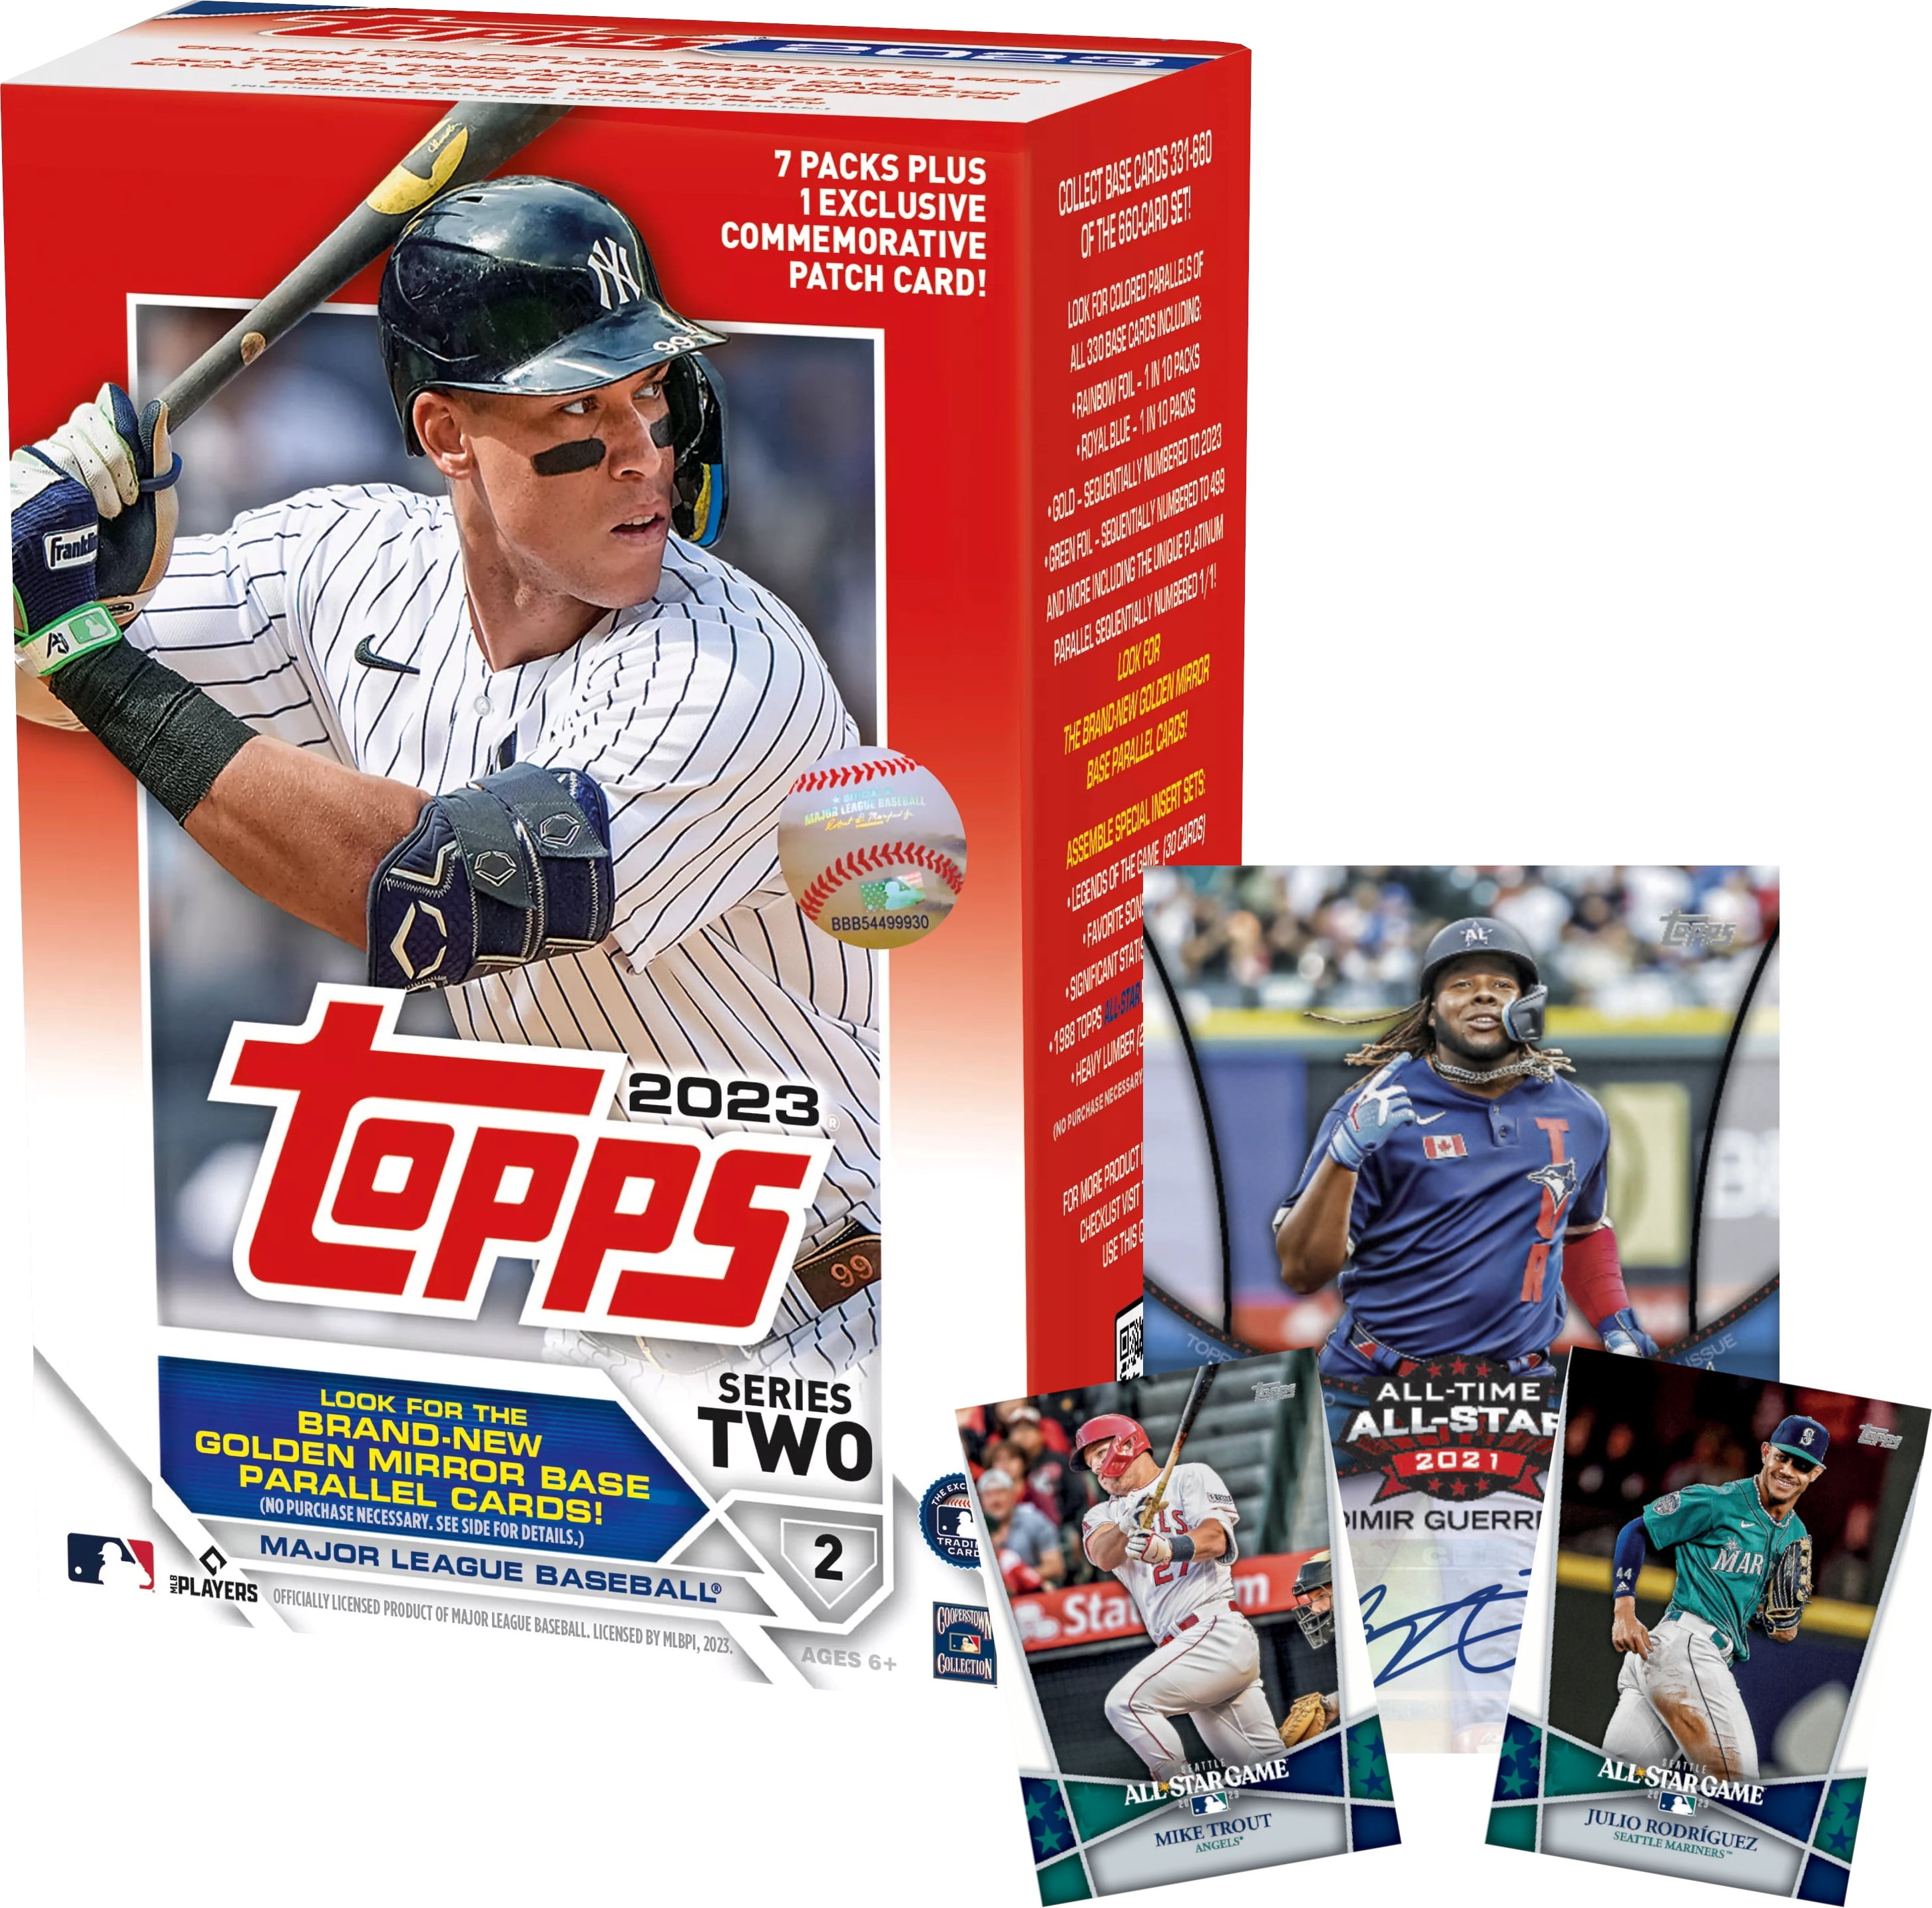 Exclusive! 2023 Topps Series 2 Baseball Blaster Box - Free All-Star Game  Card Pack!